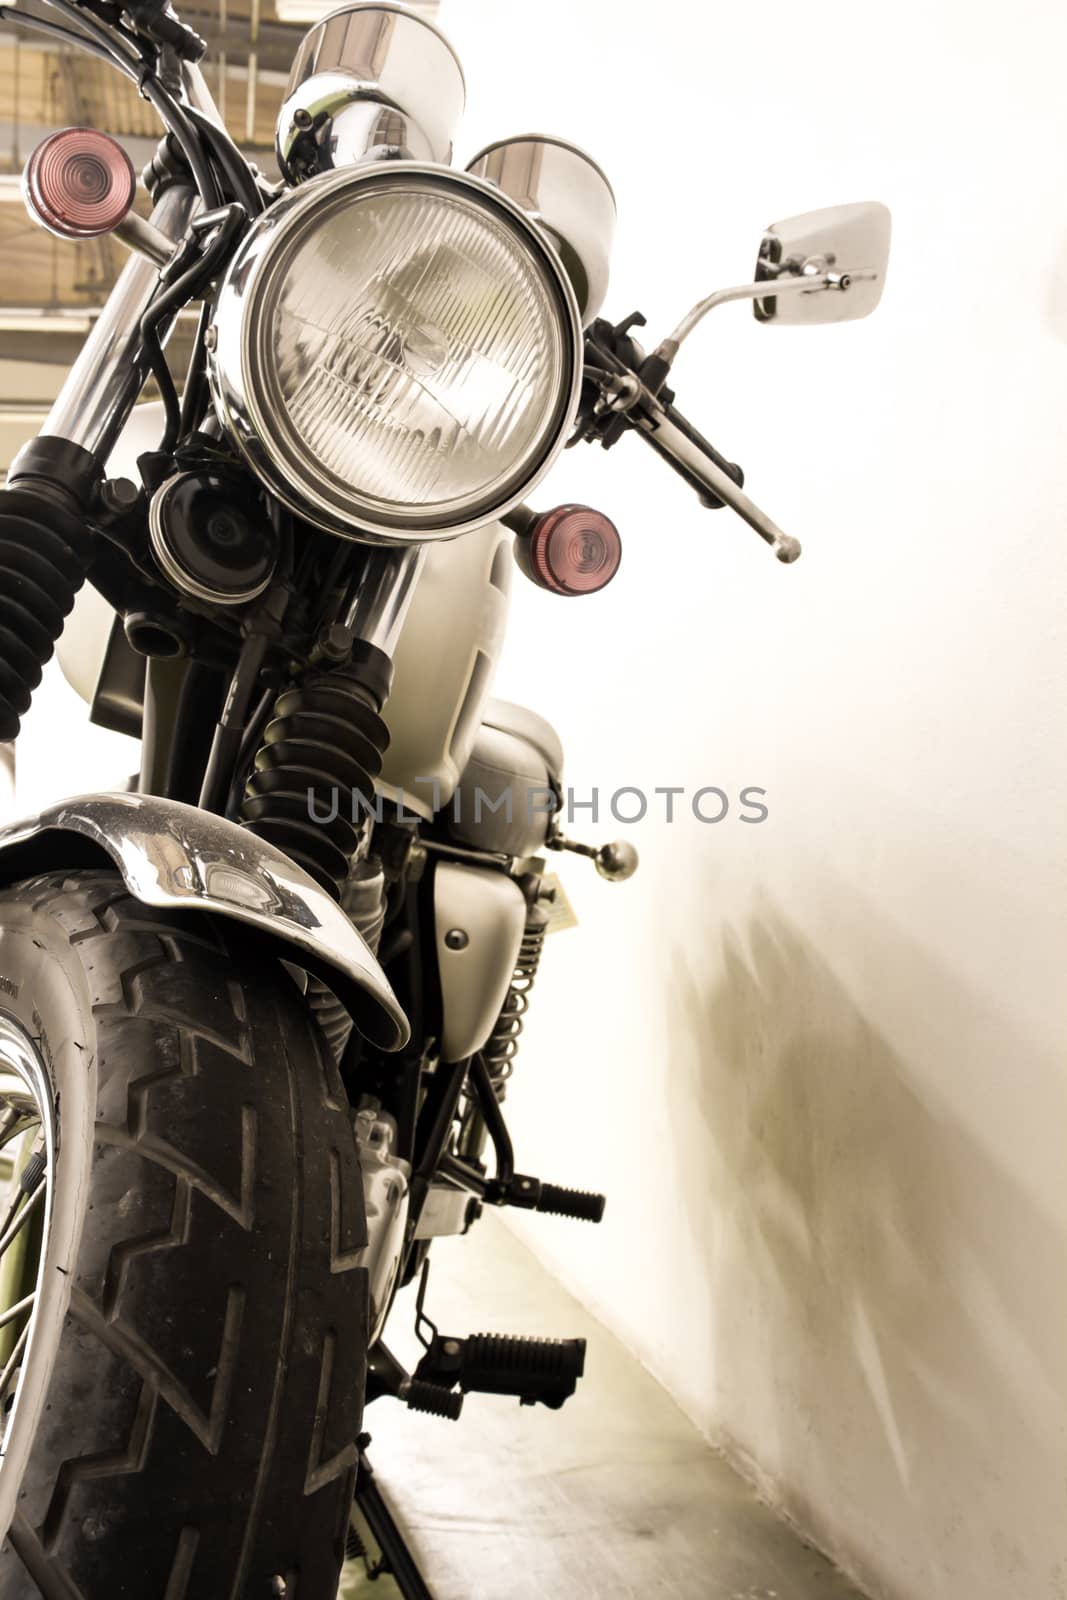 vintage Motorcycle by shutterbird